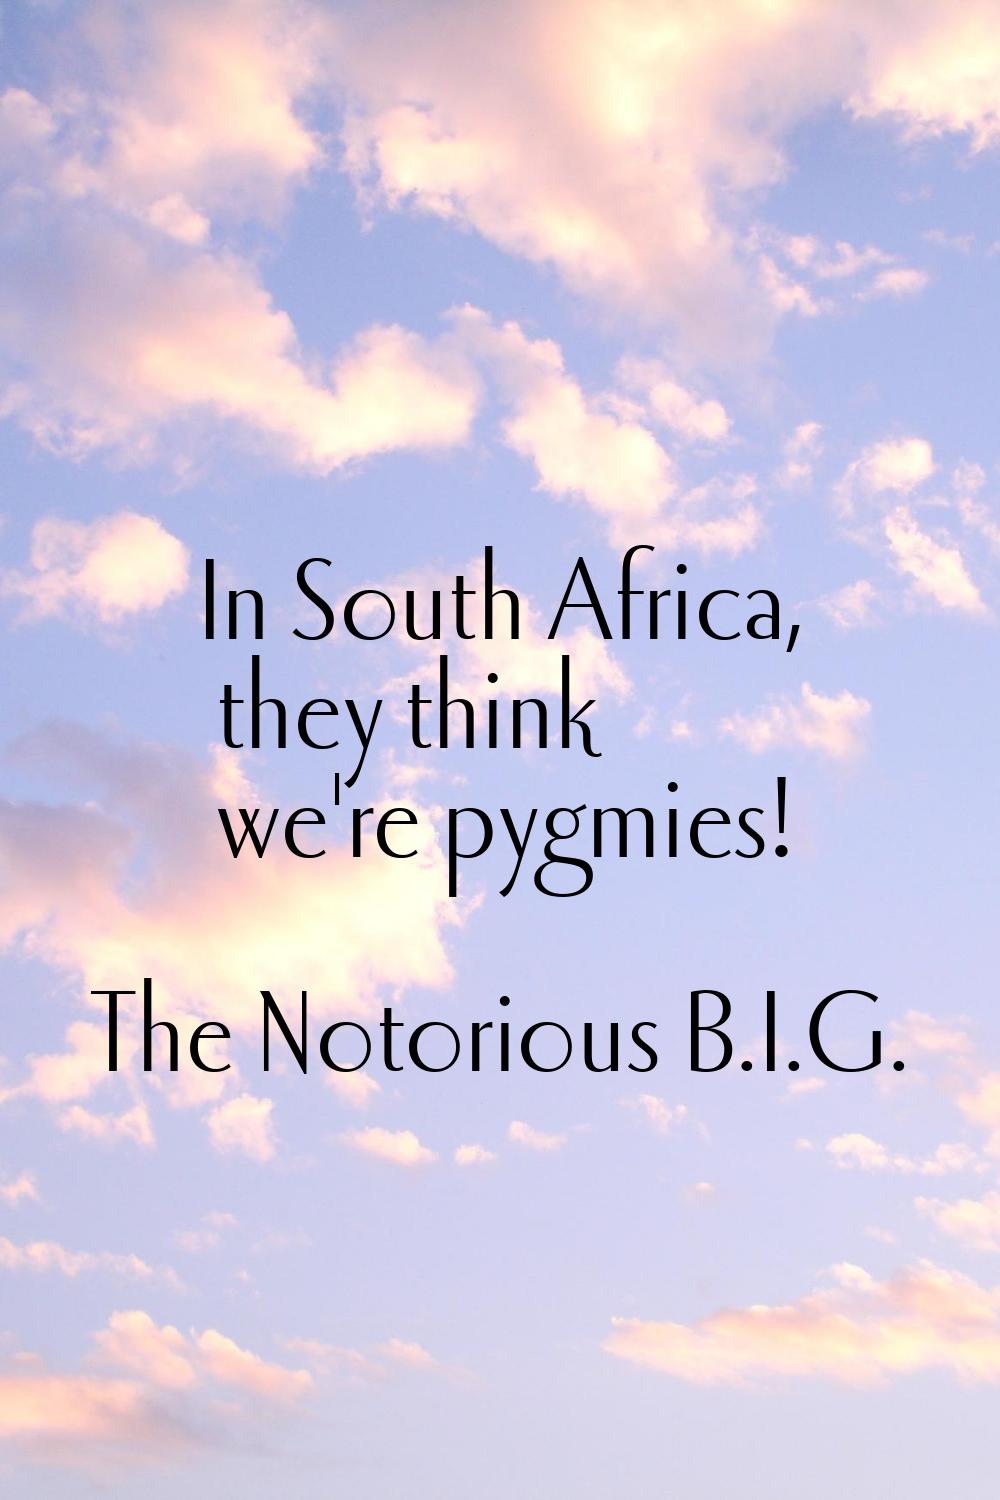 In South Africa, they think we're pygmies!